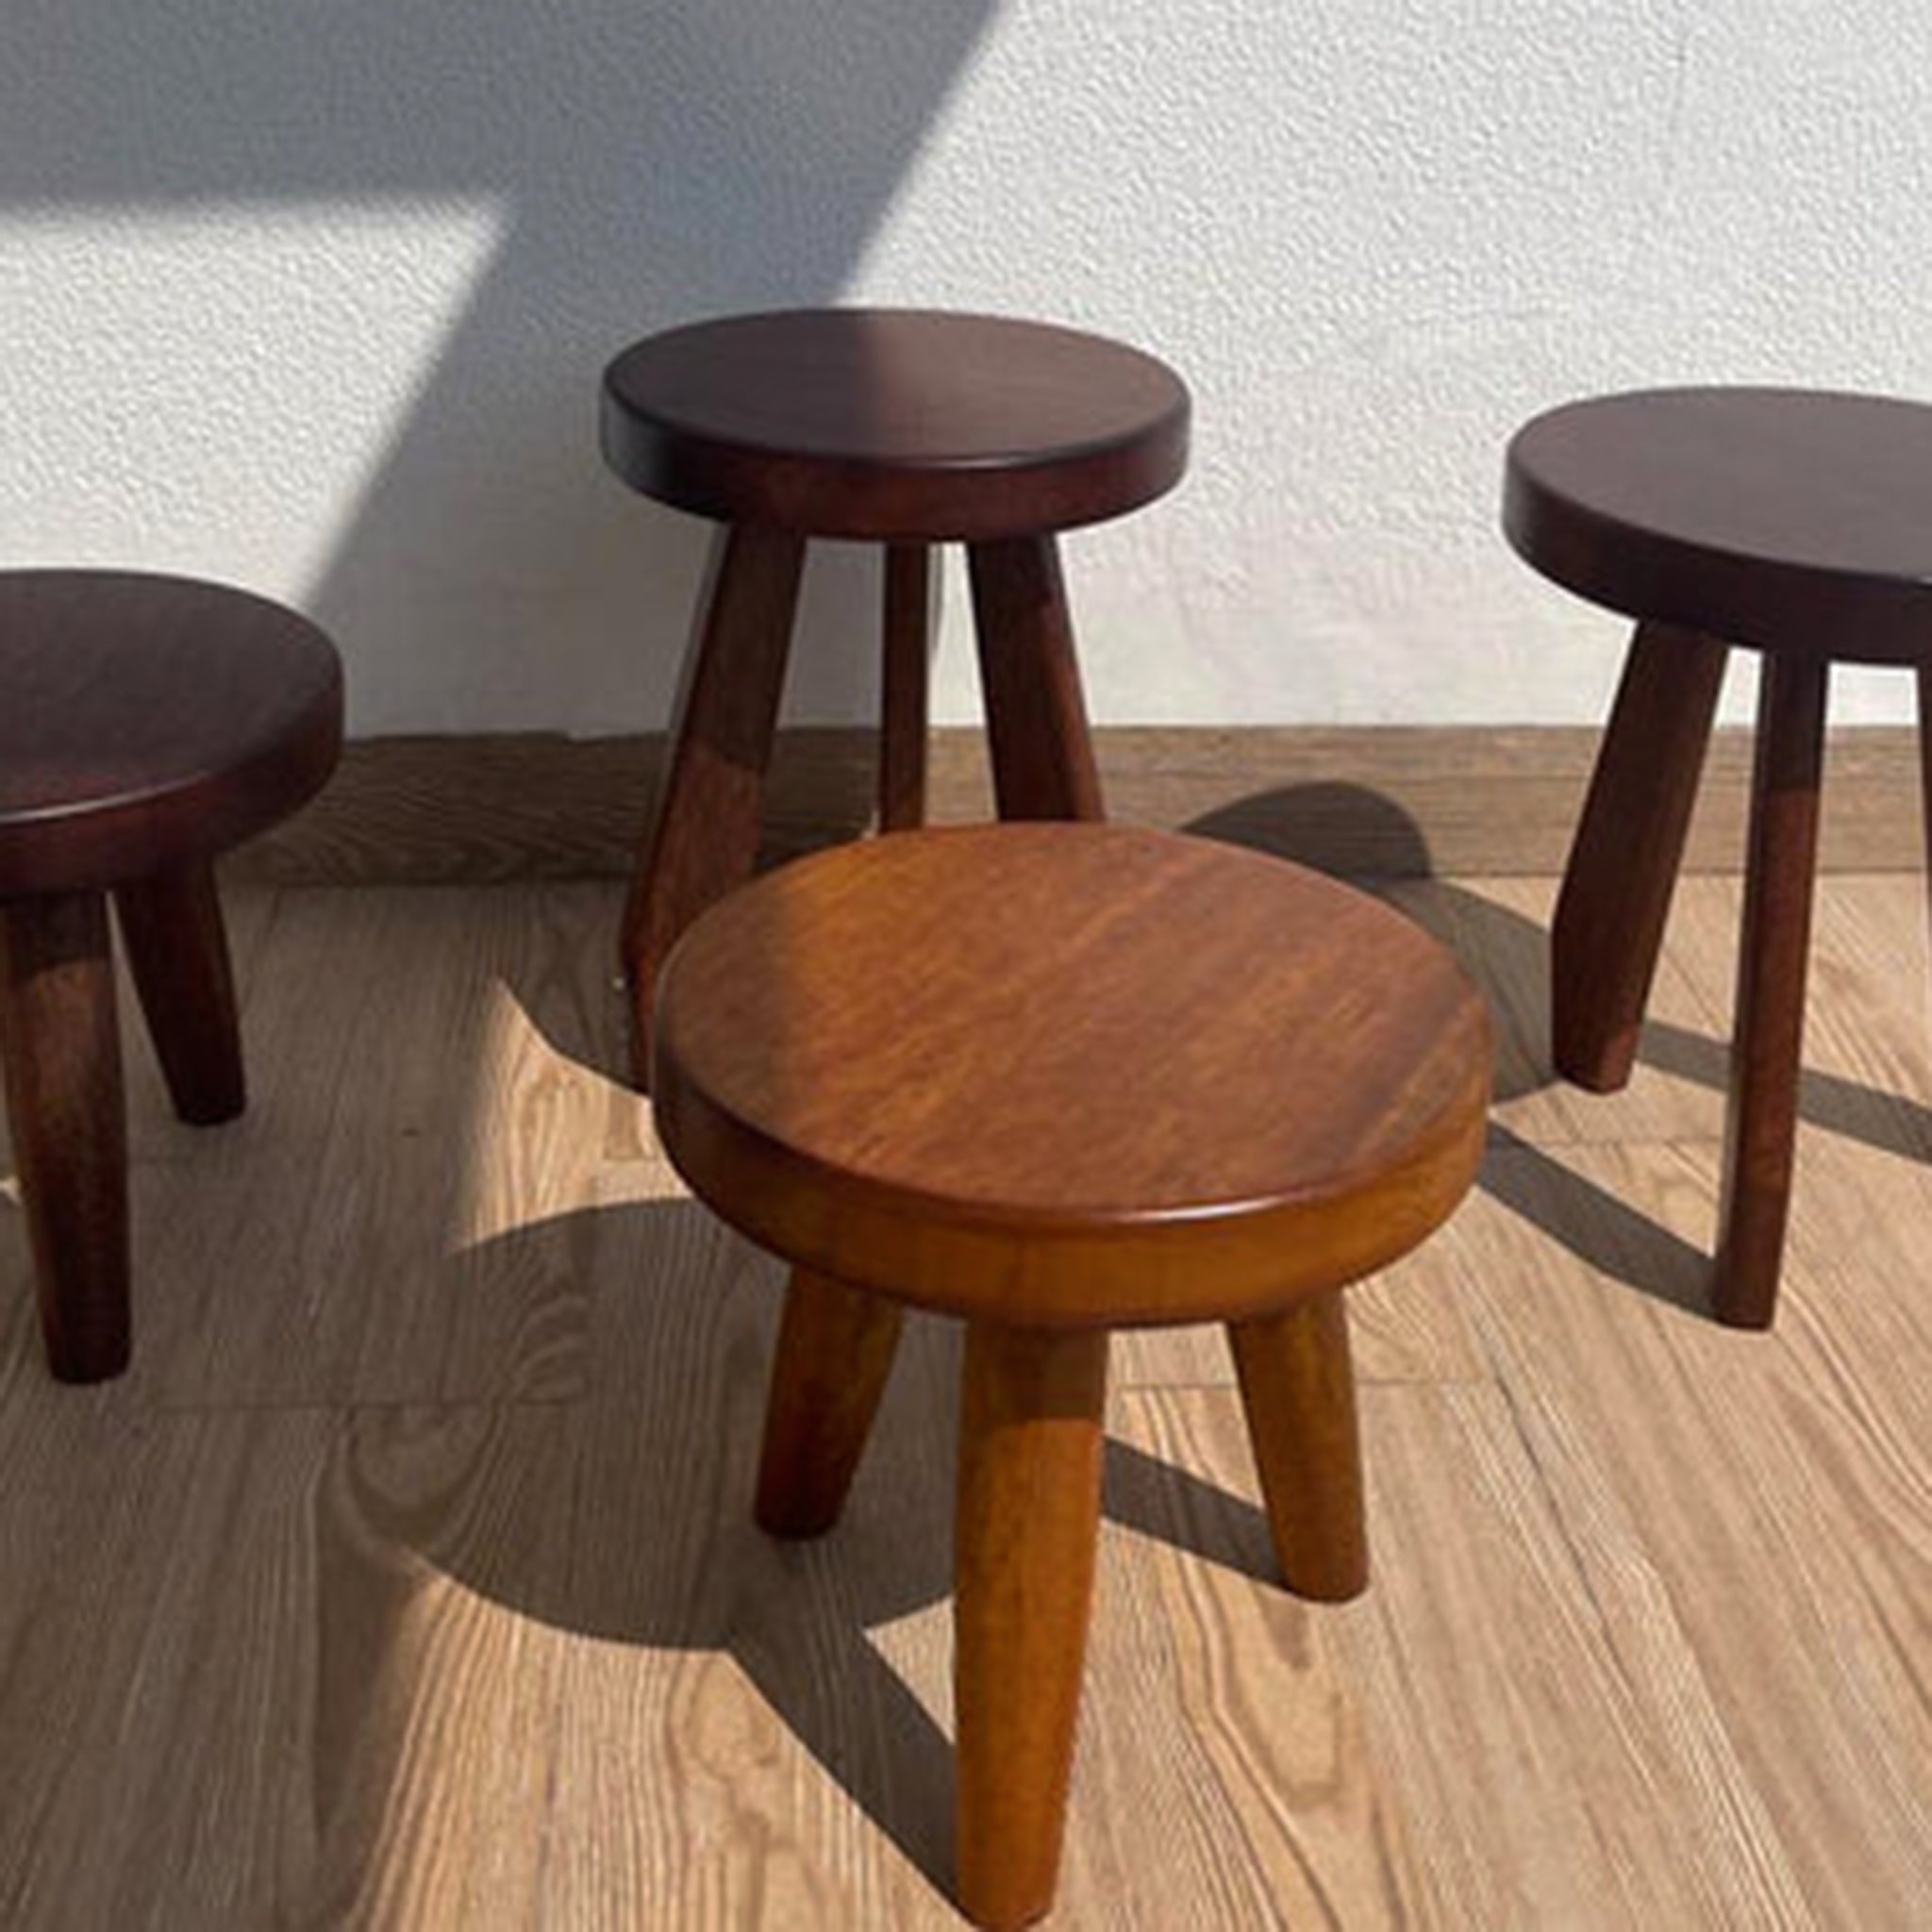 Four wooden three-legged mini stools in various shades of brown on a wooden floor